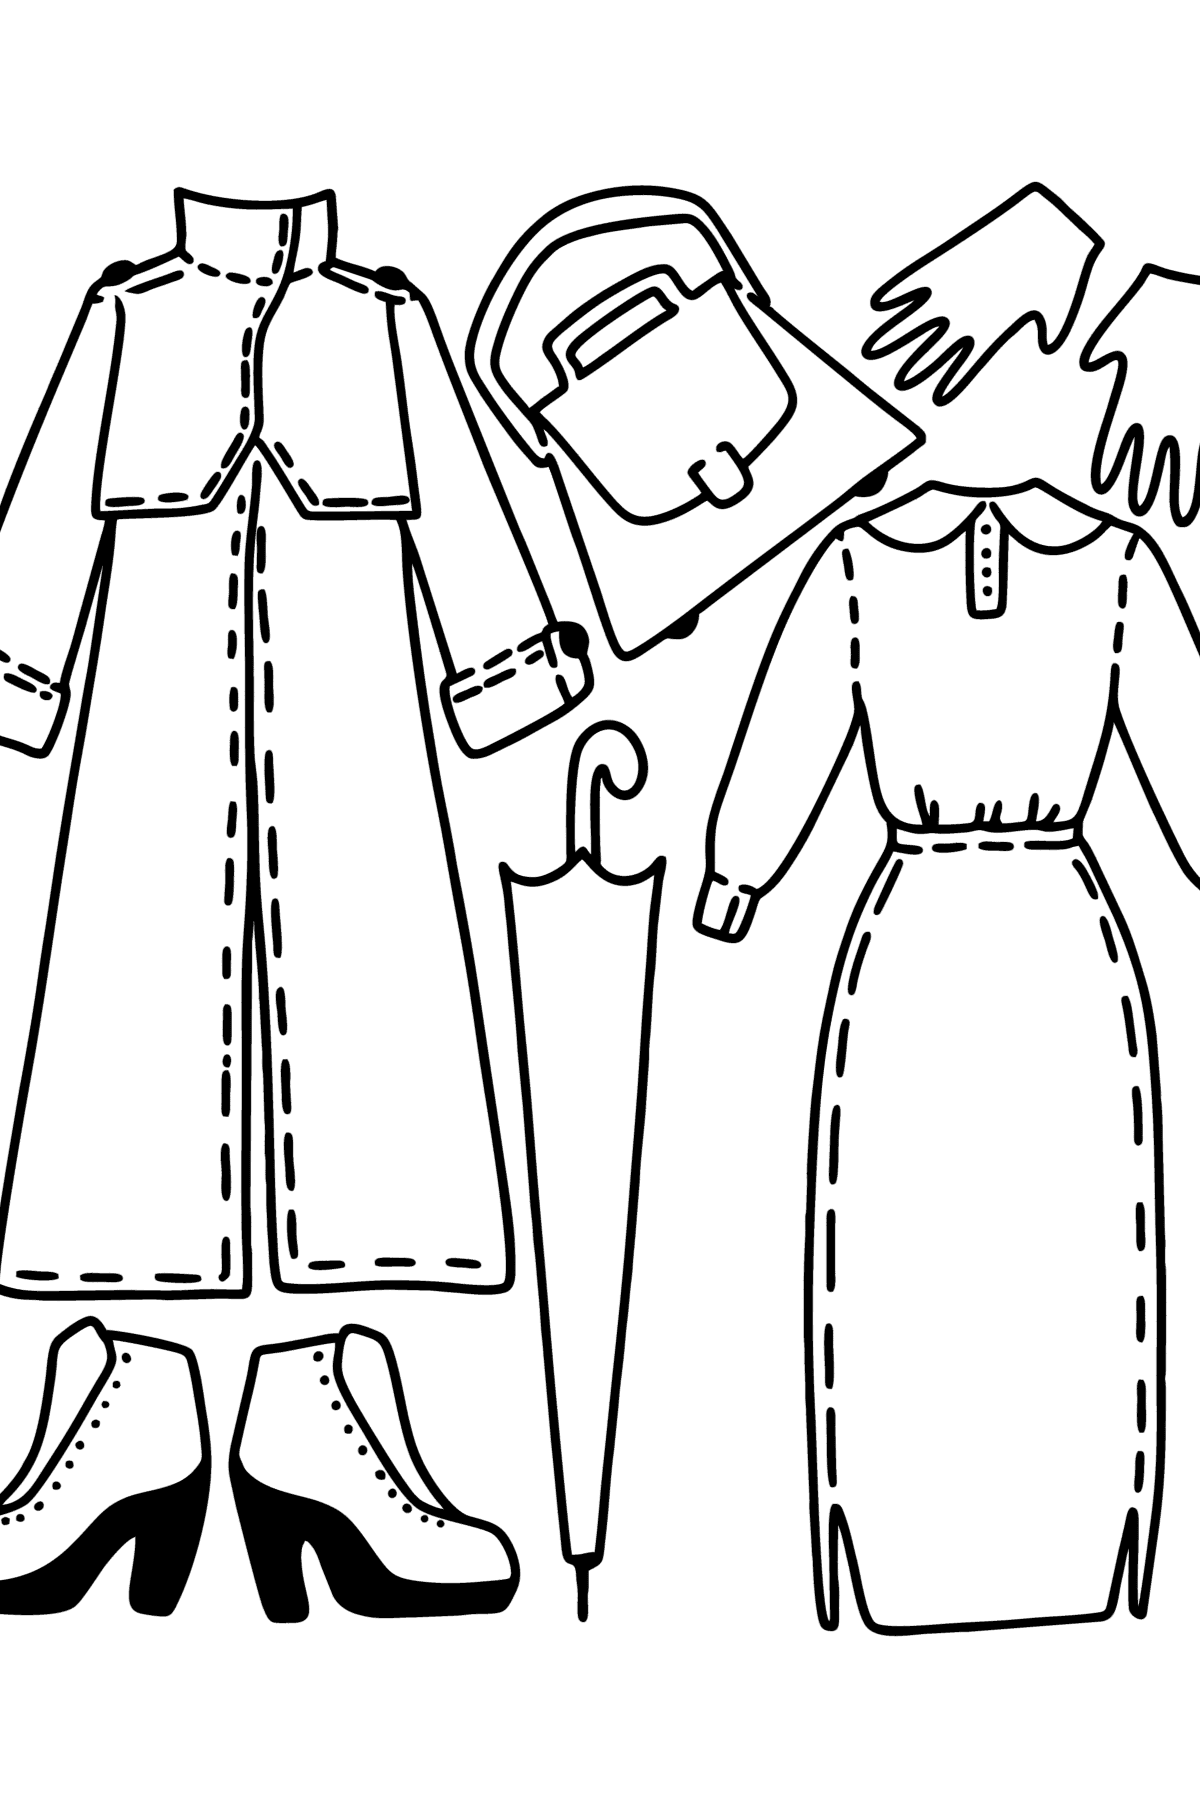 Autumn Clothes coloring page for girl - Coloring Pages for Kids